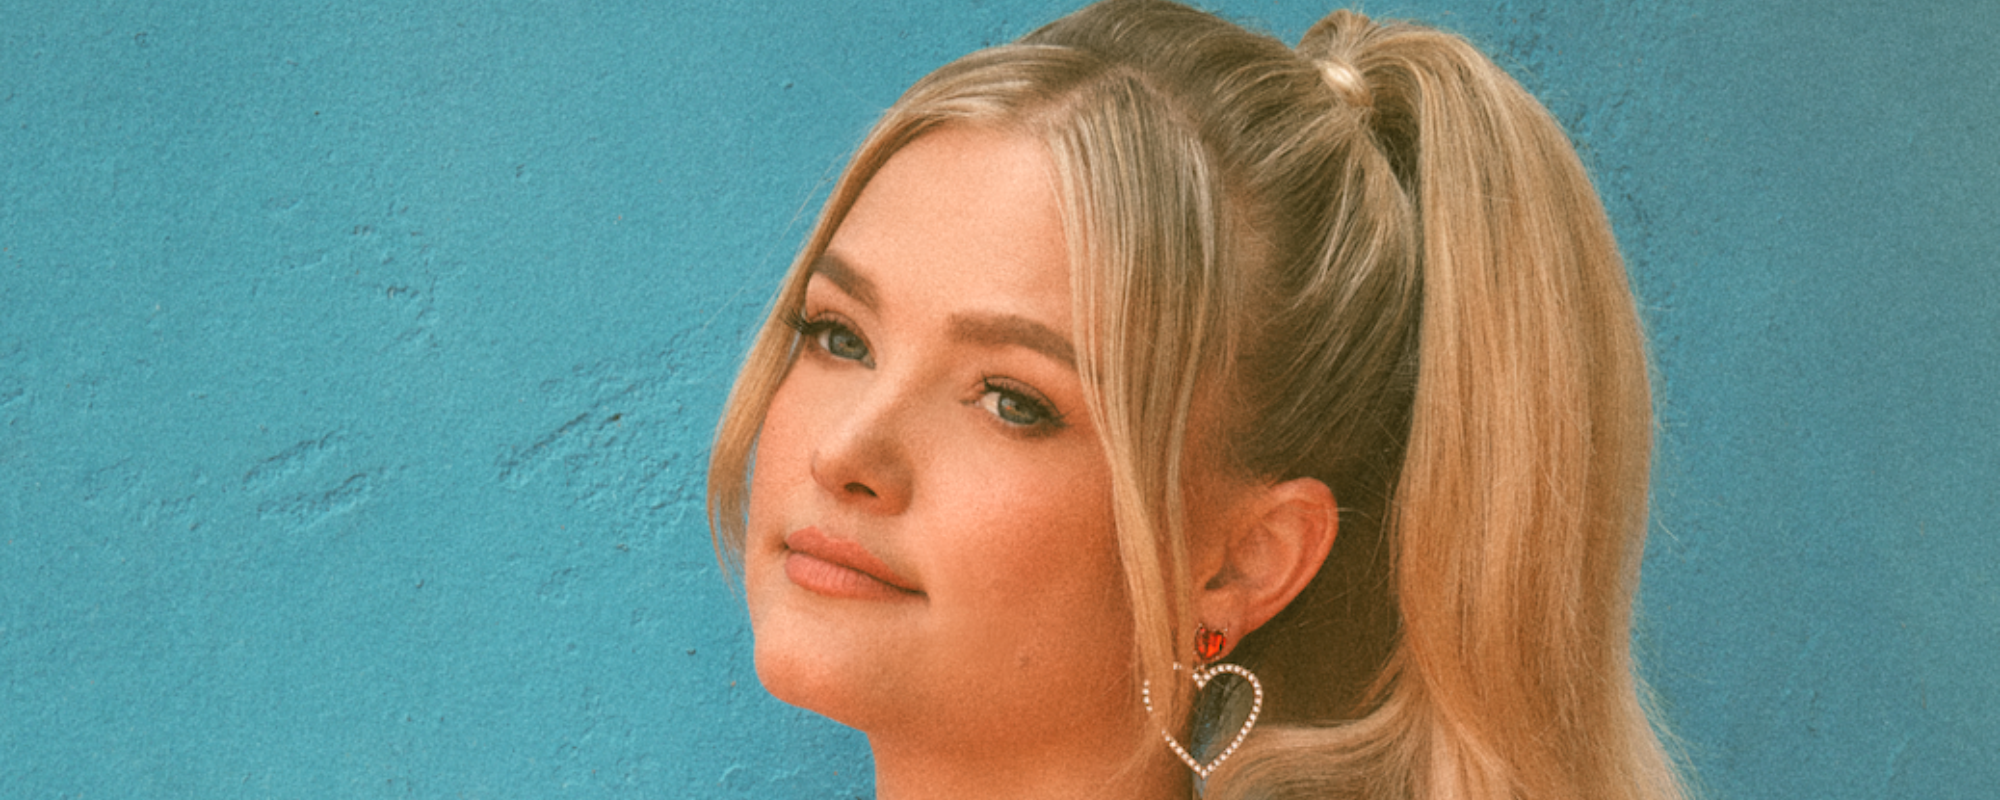 Hailey Whitters Announces ‘I’m In Love’ with New EP